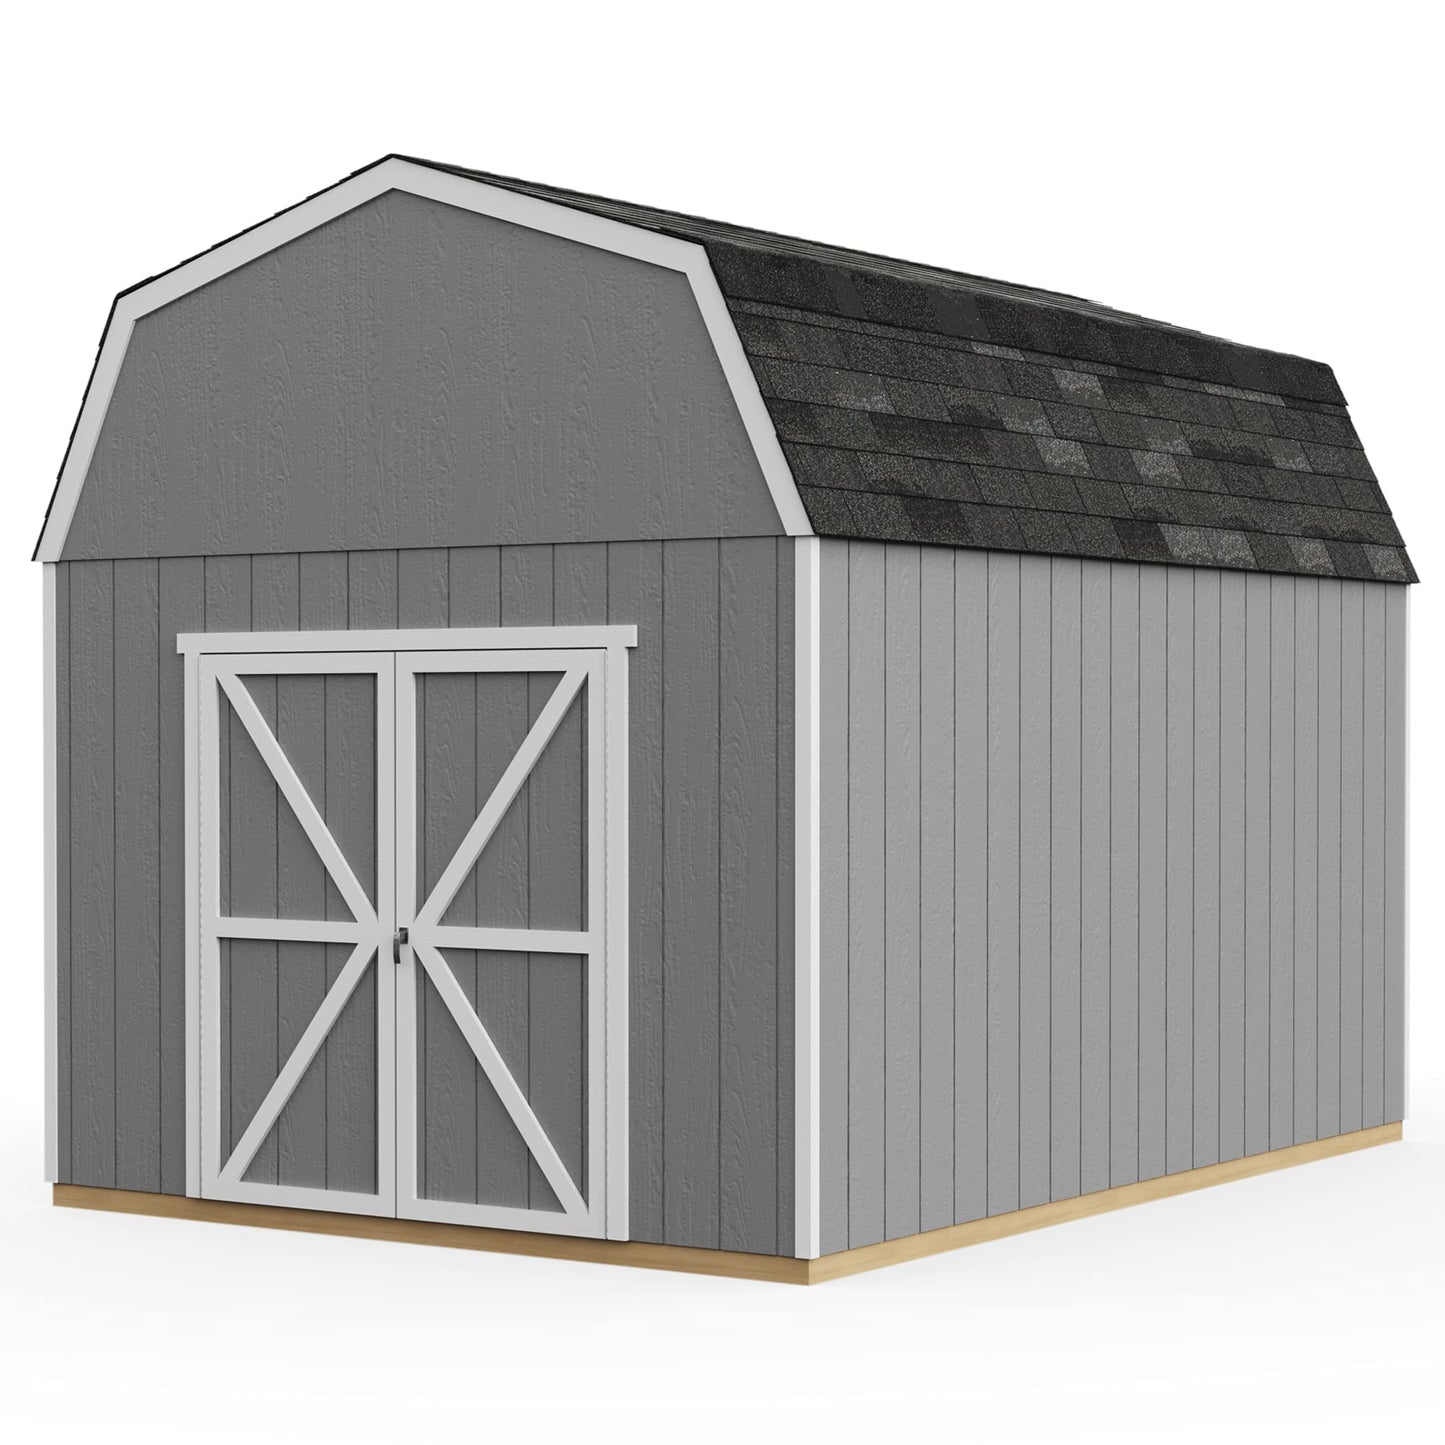 Handy Home Products Braymore 10x14 Do-It-Yourself Wooden Storage Shed Without Floor